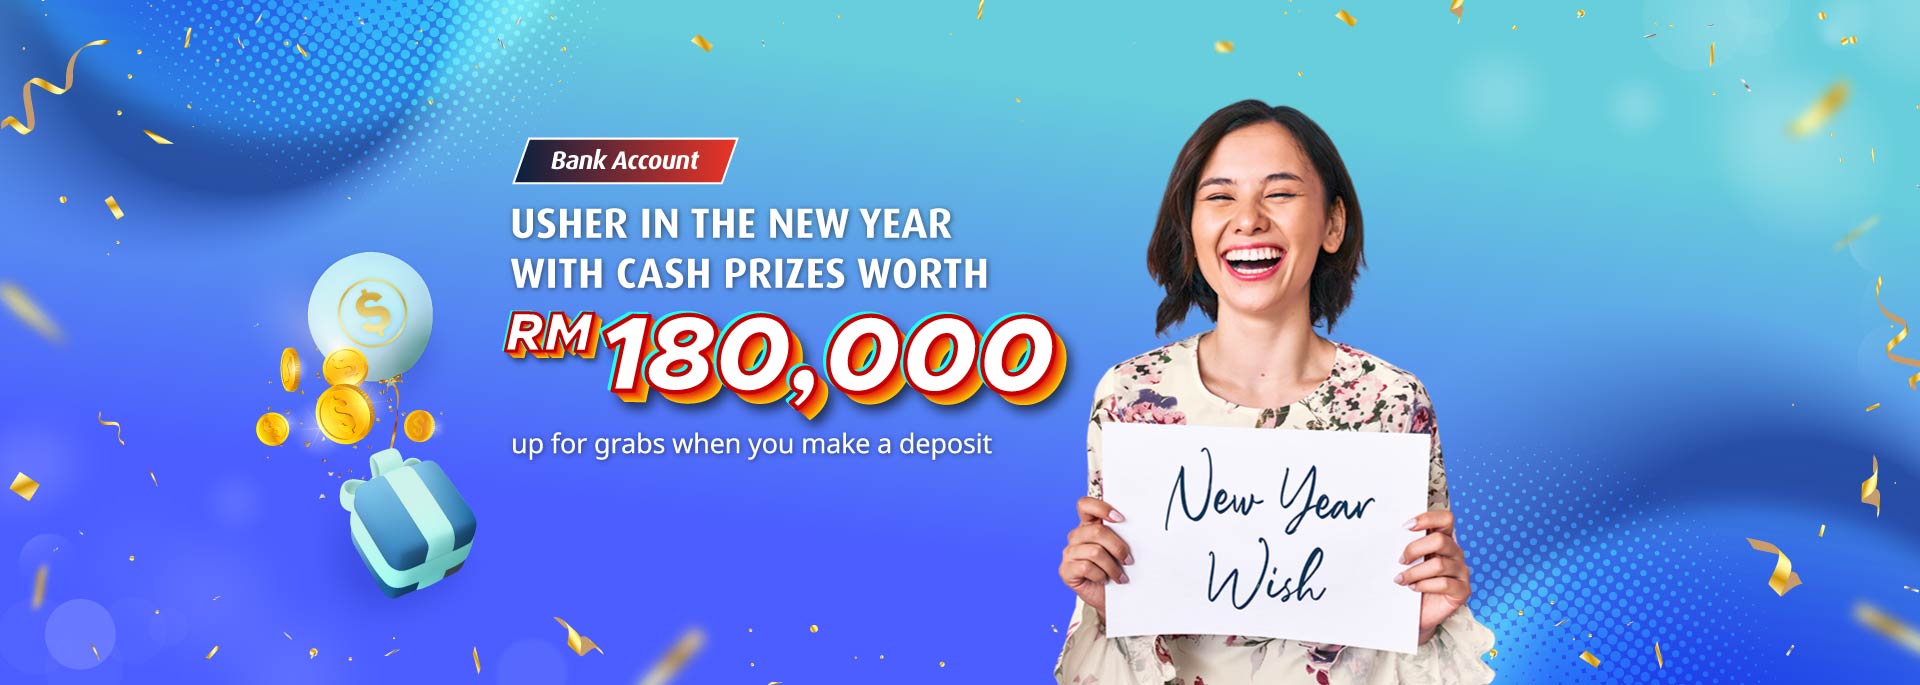 Let's welcome the New Year with RM180,000!